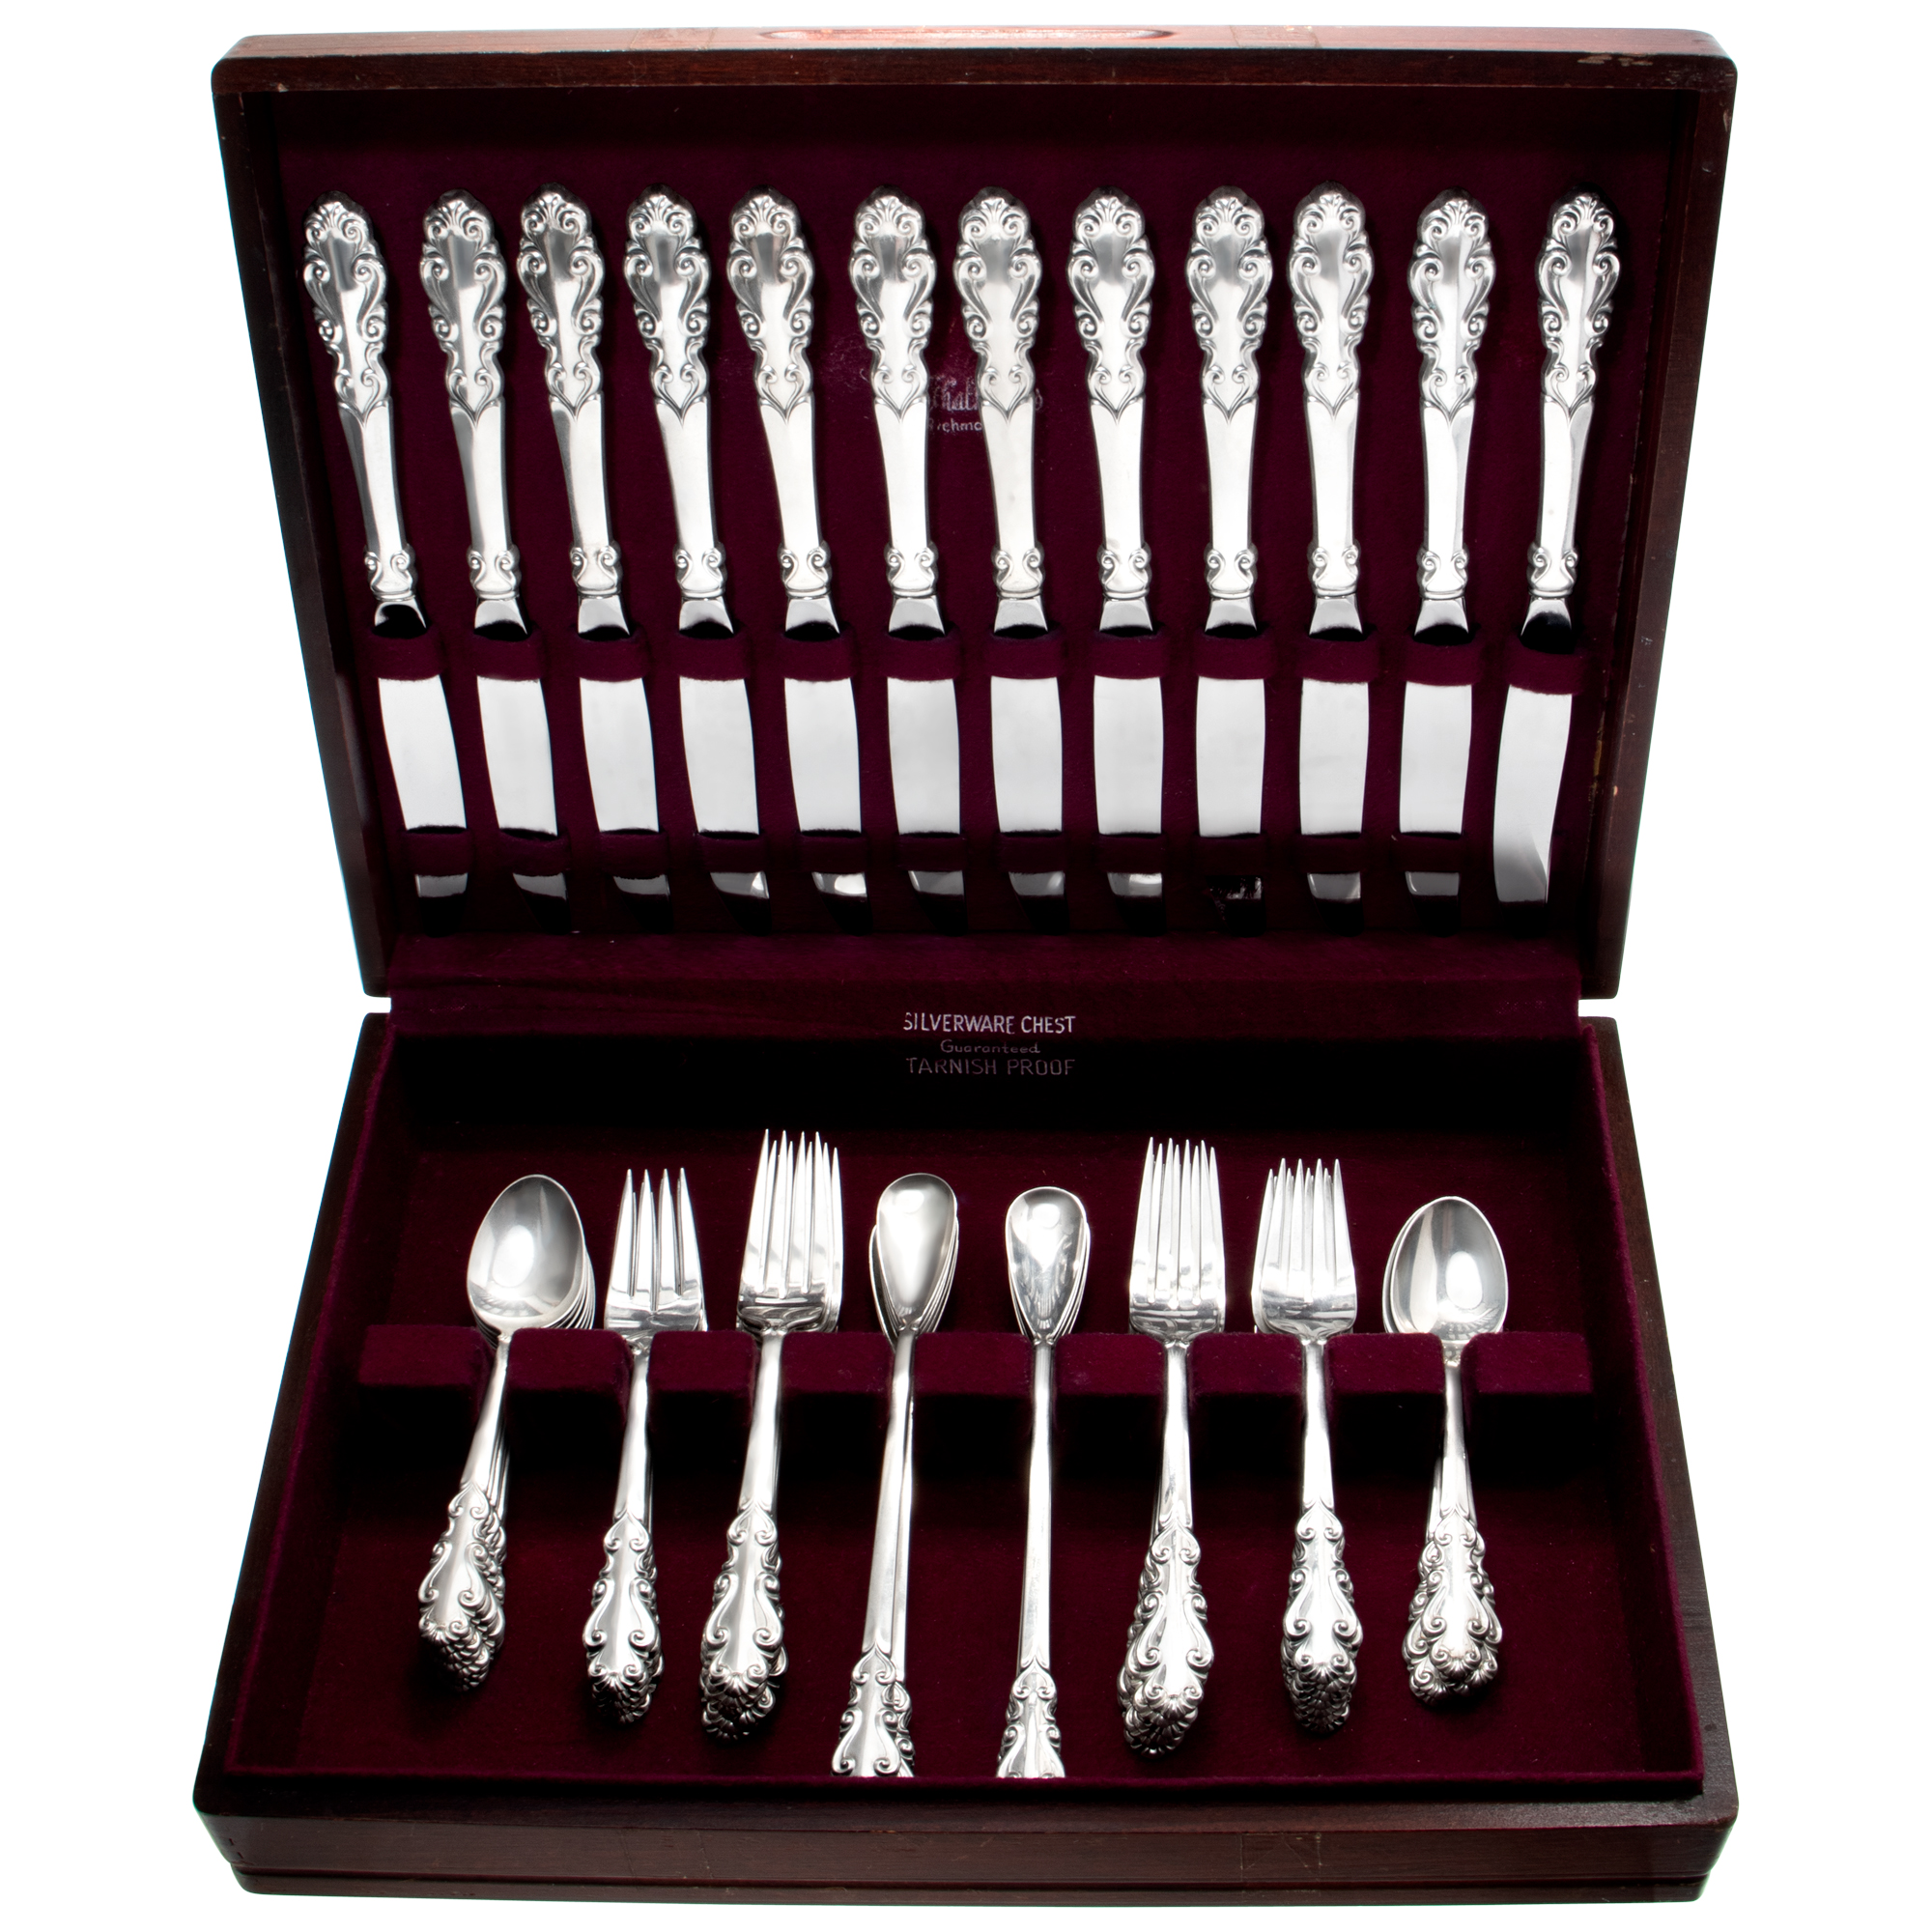 ESPLANADE Sterling silver flatware set patented in 1952 by Towle Silversmiths. 5 place settings for 12-. 66 Pieces total. image 1